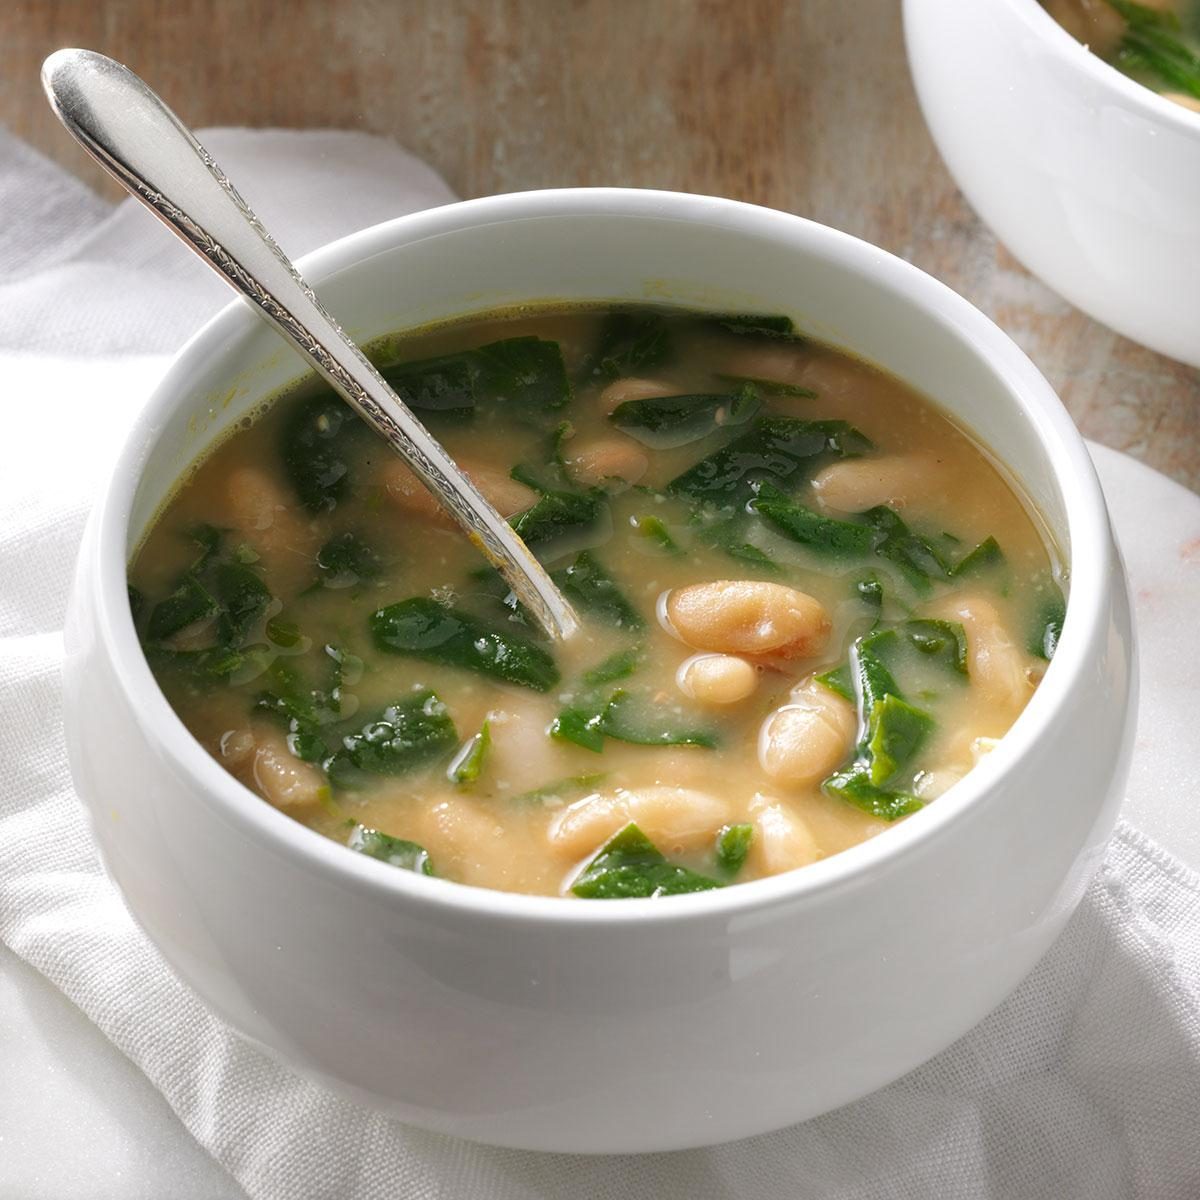 Spinach and White Bean Soup Recipe: How to Make It